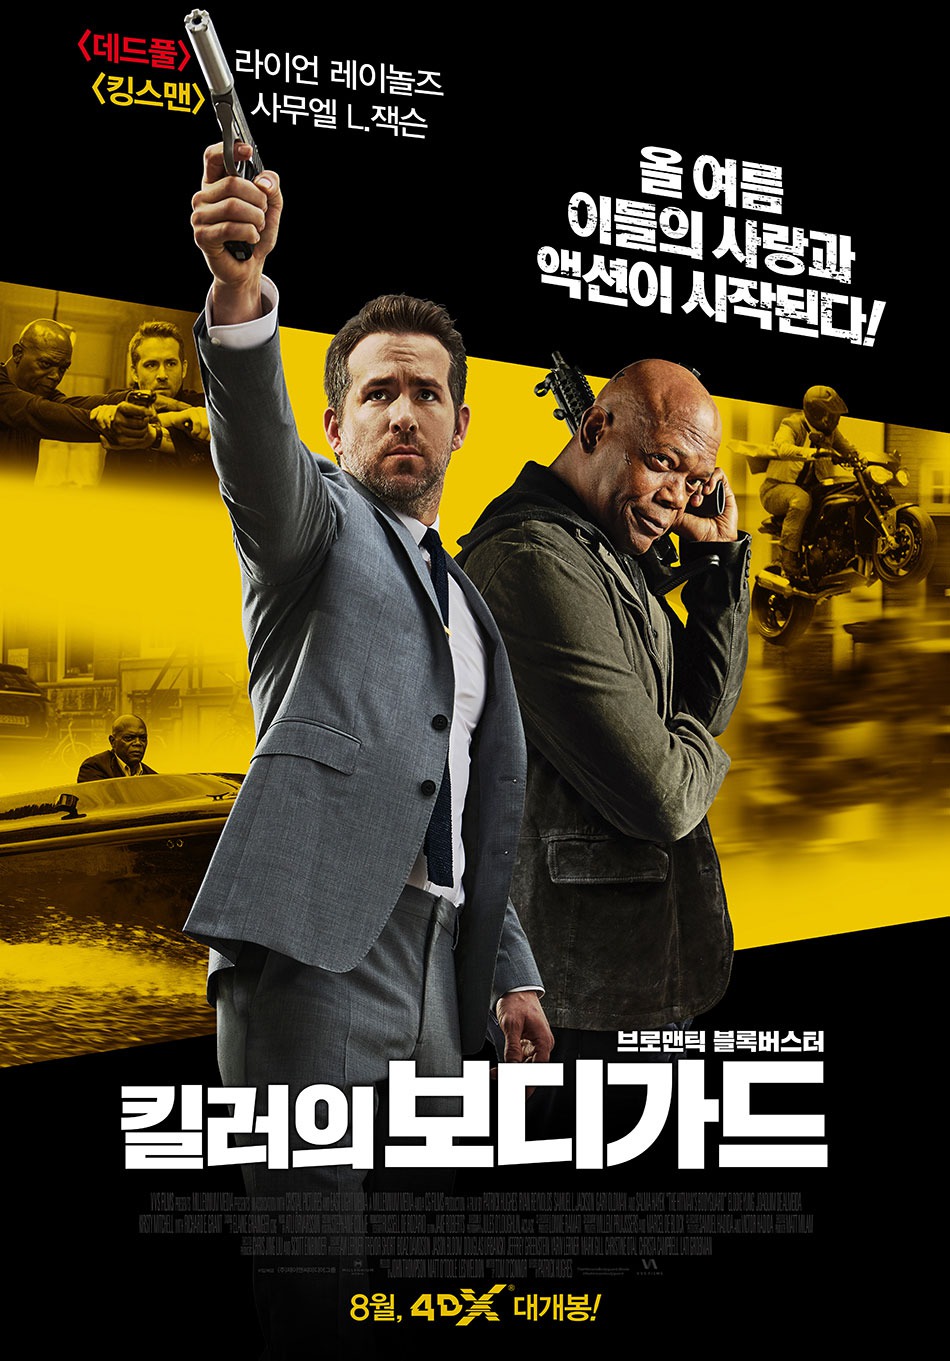 Extra Large Movie Poster Image for The Hitman's Bodyguard (#10 of 12)